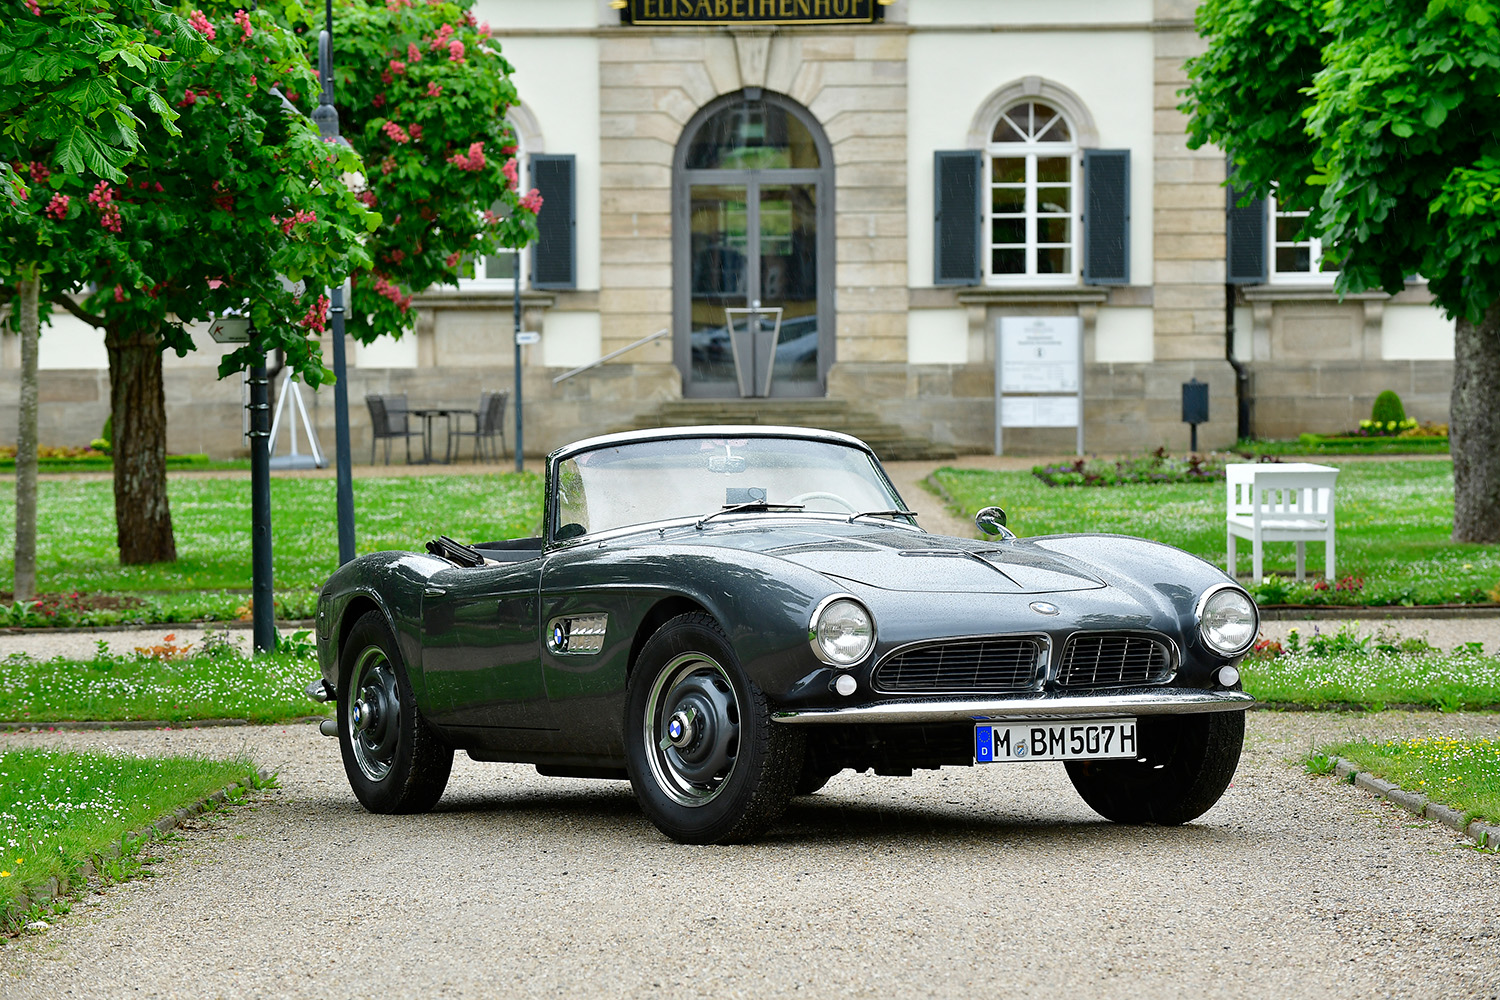 BMW 507 roadster parked in front of large house with gorgeous green grass and trees